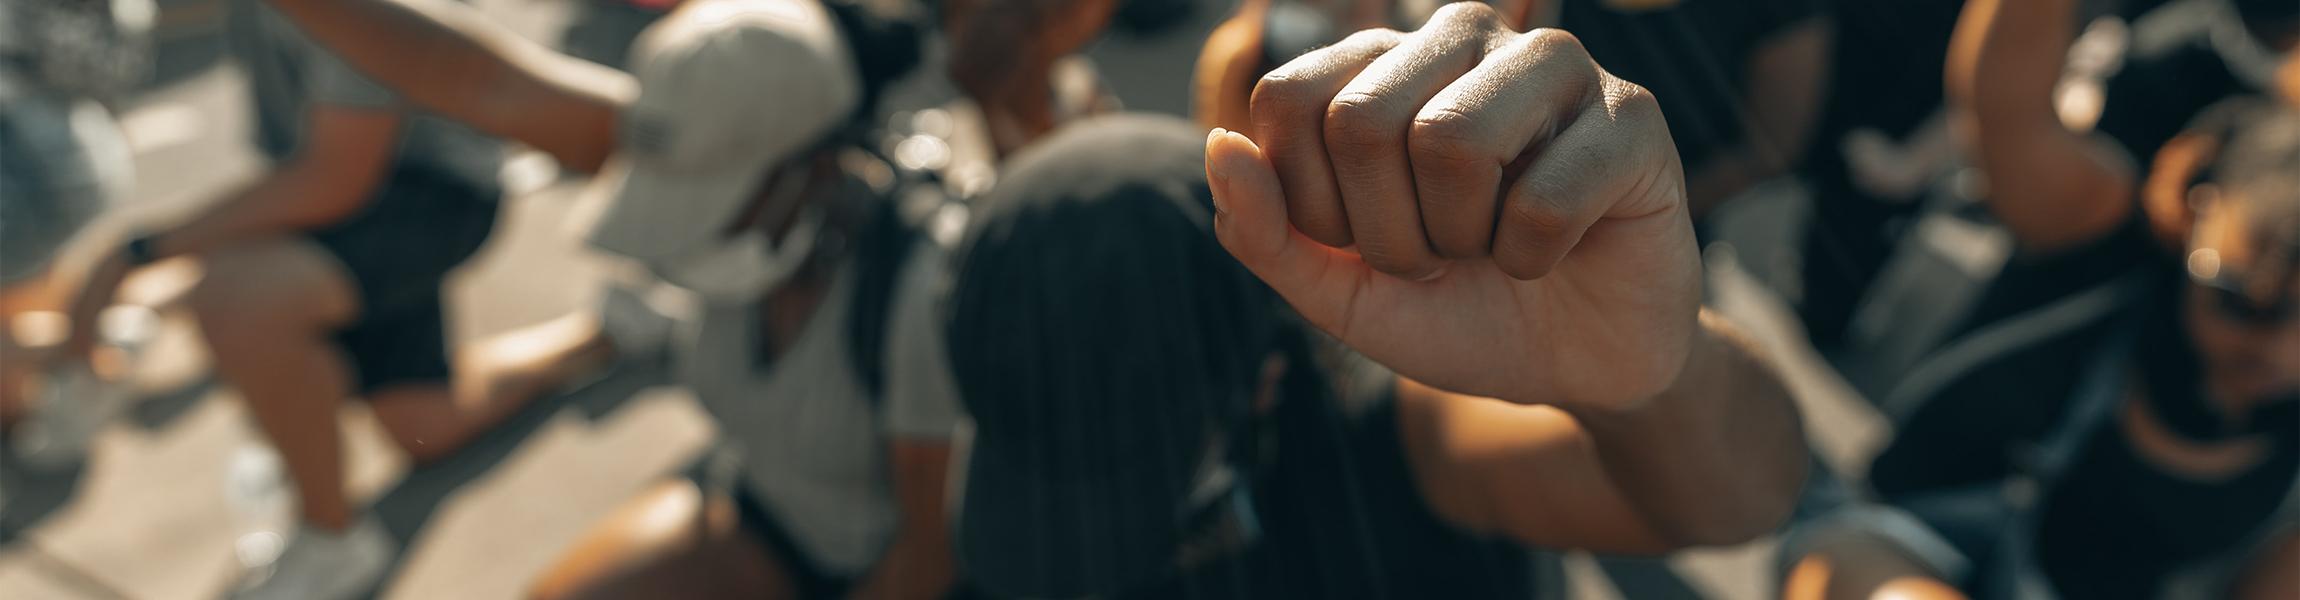 A closeup photograph of a Black protestor raising their fist, surrounded by many other protestors